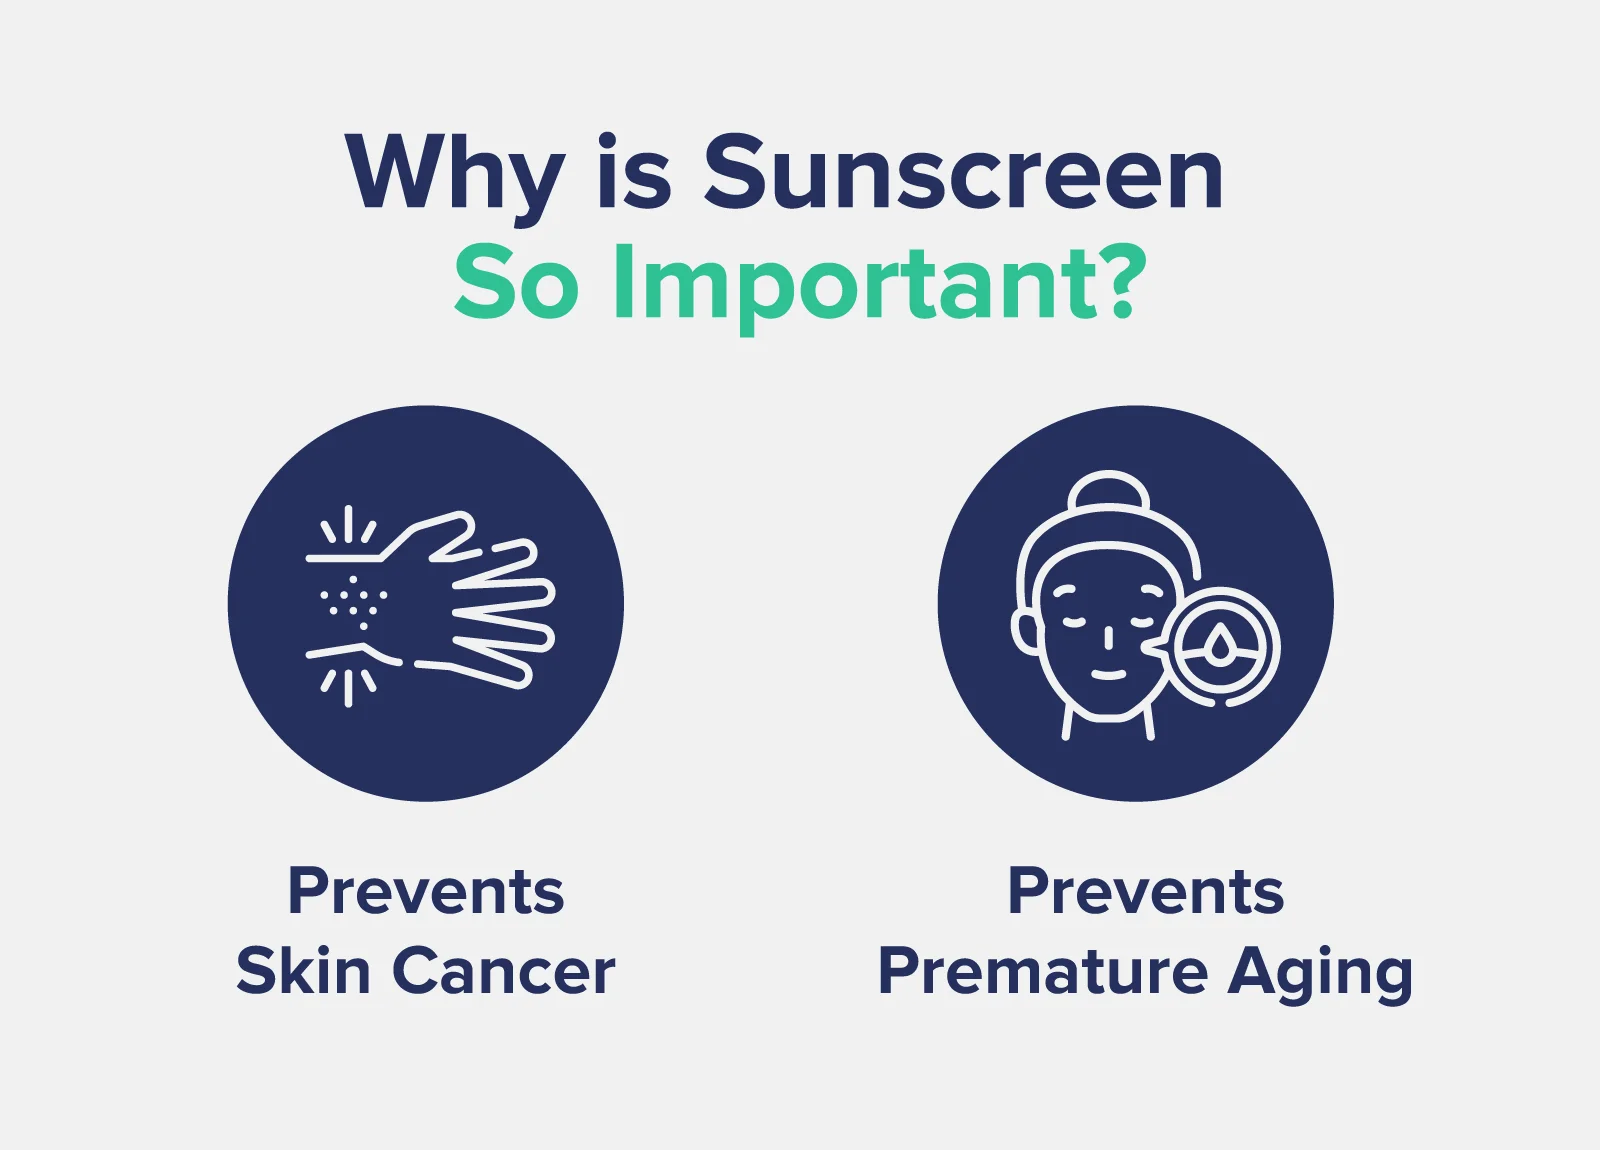 sunscreen prevents skin cancer and premature aging